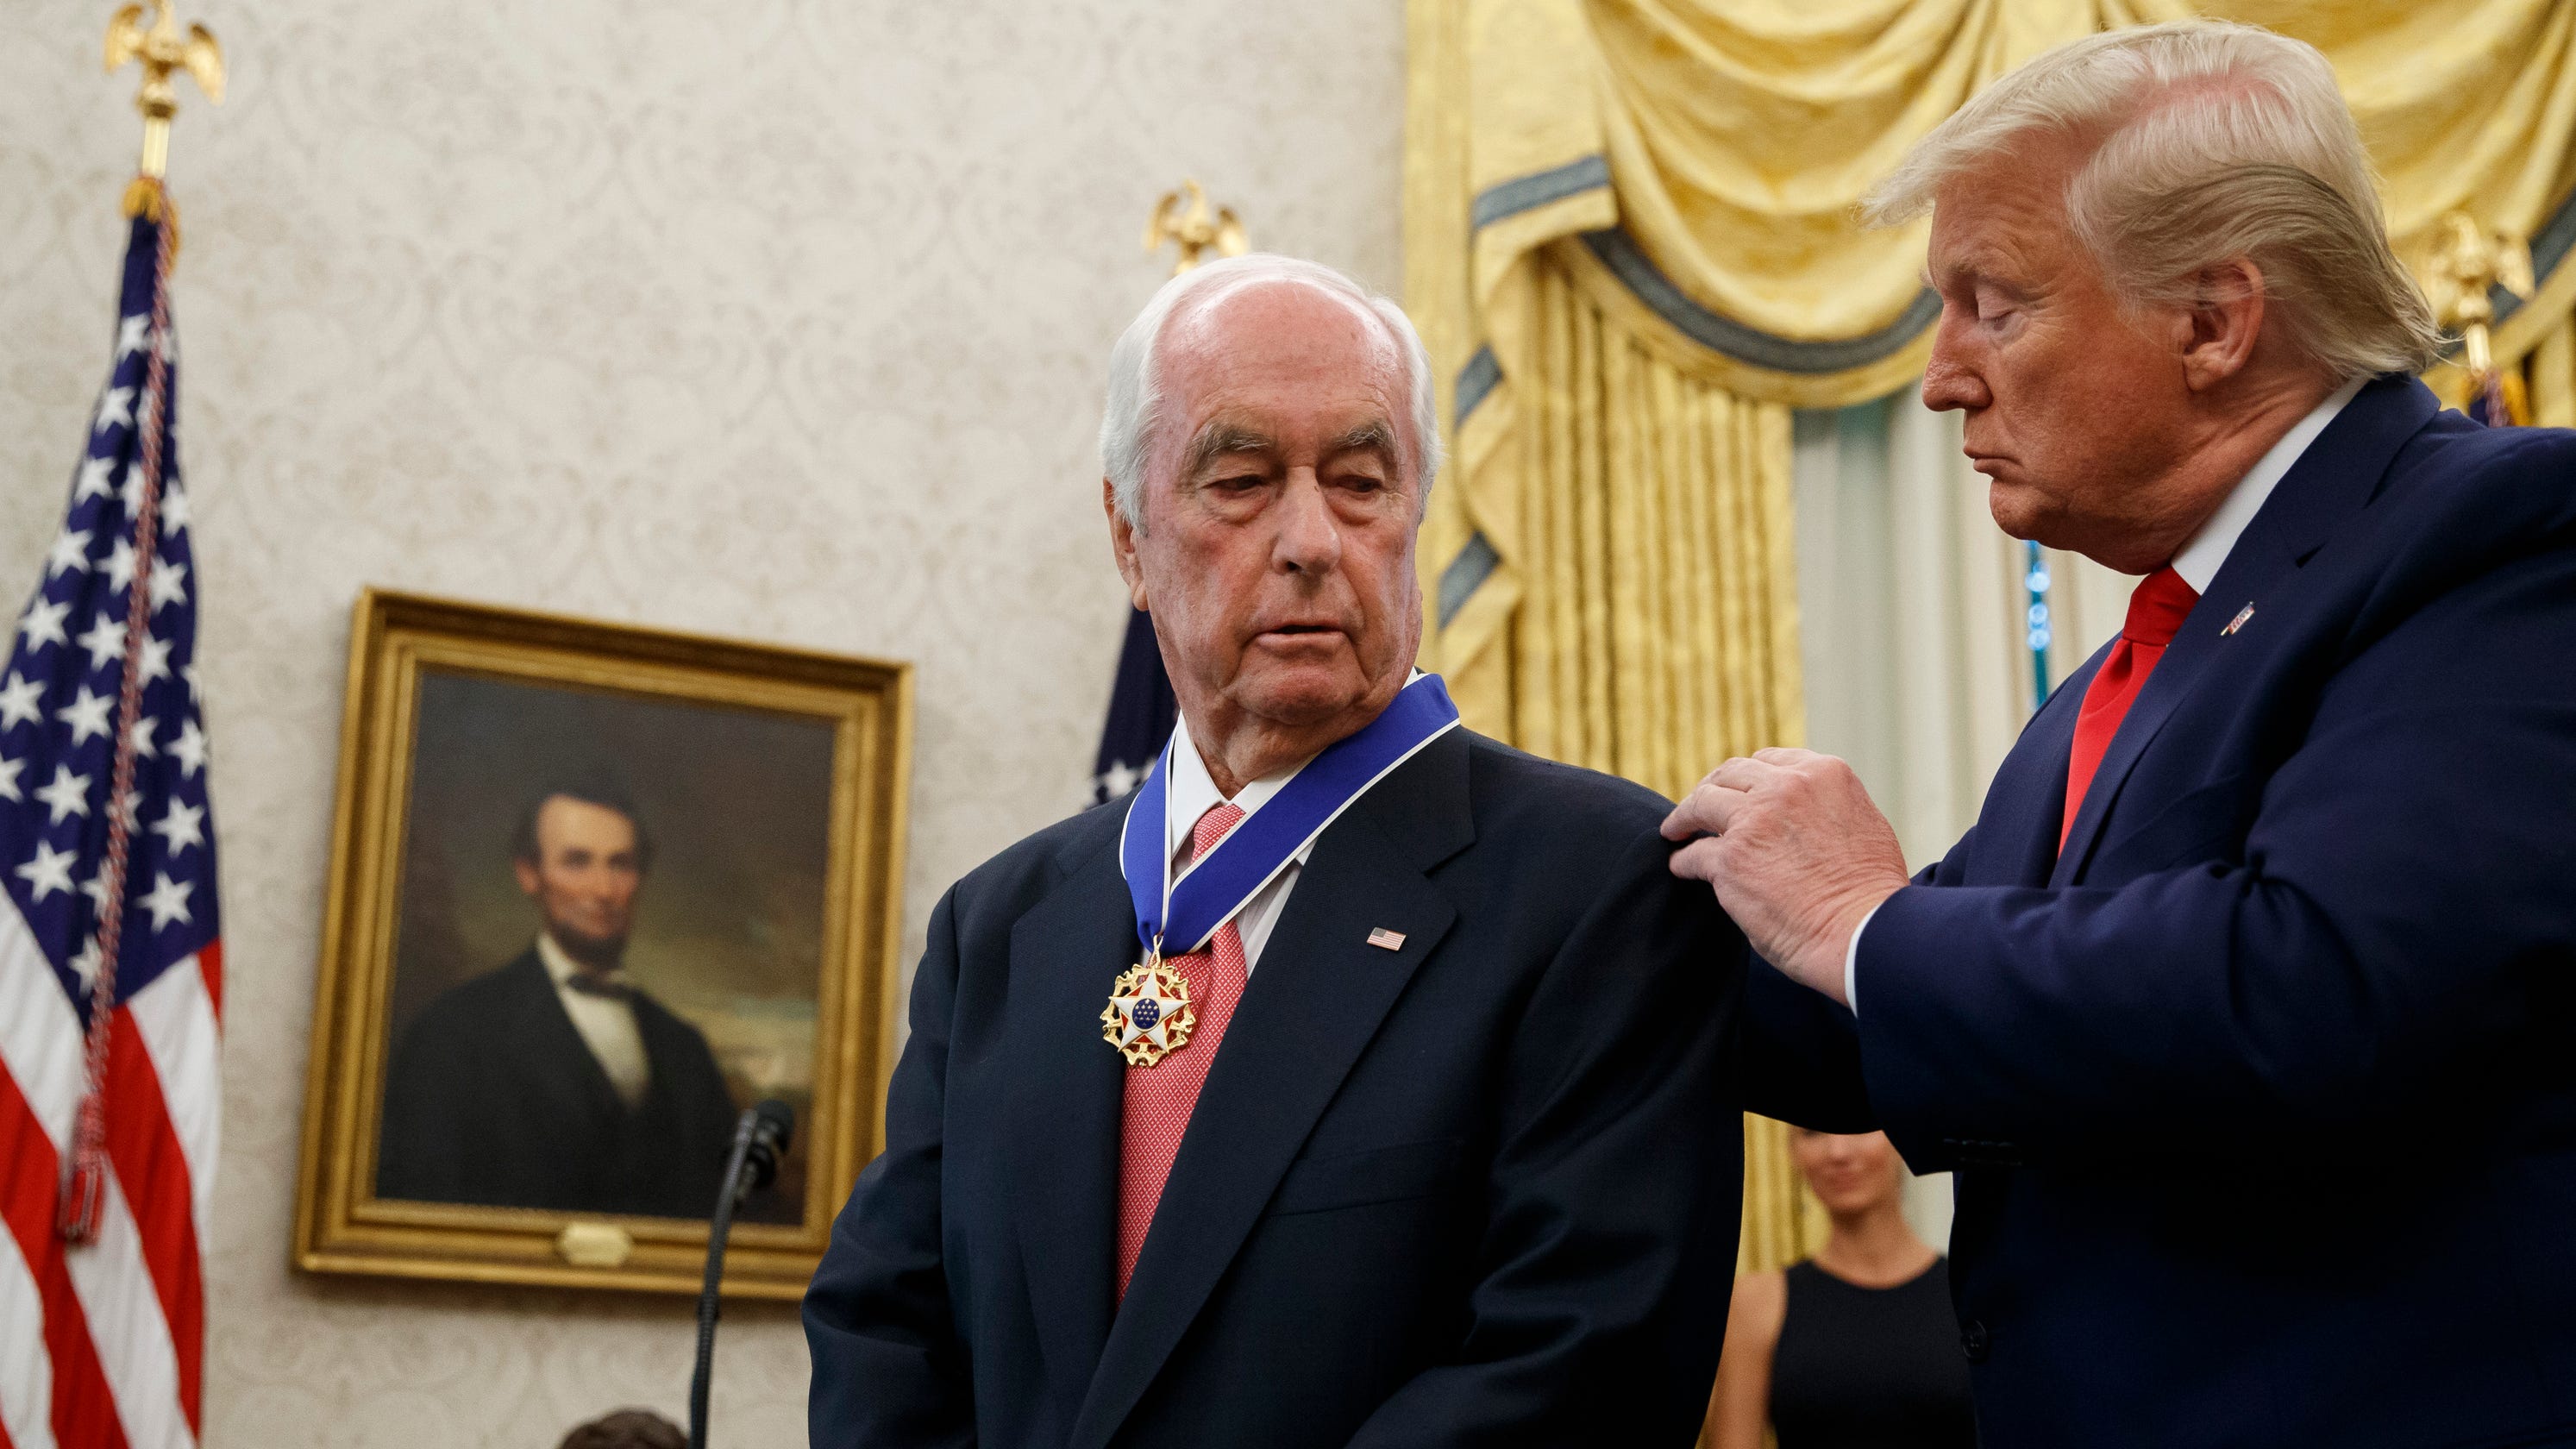 Roger Penske receives Medal of Freedom from Donald Trump